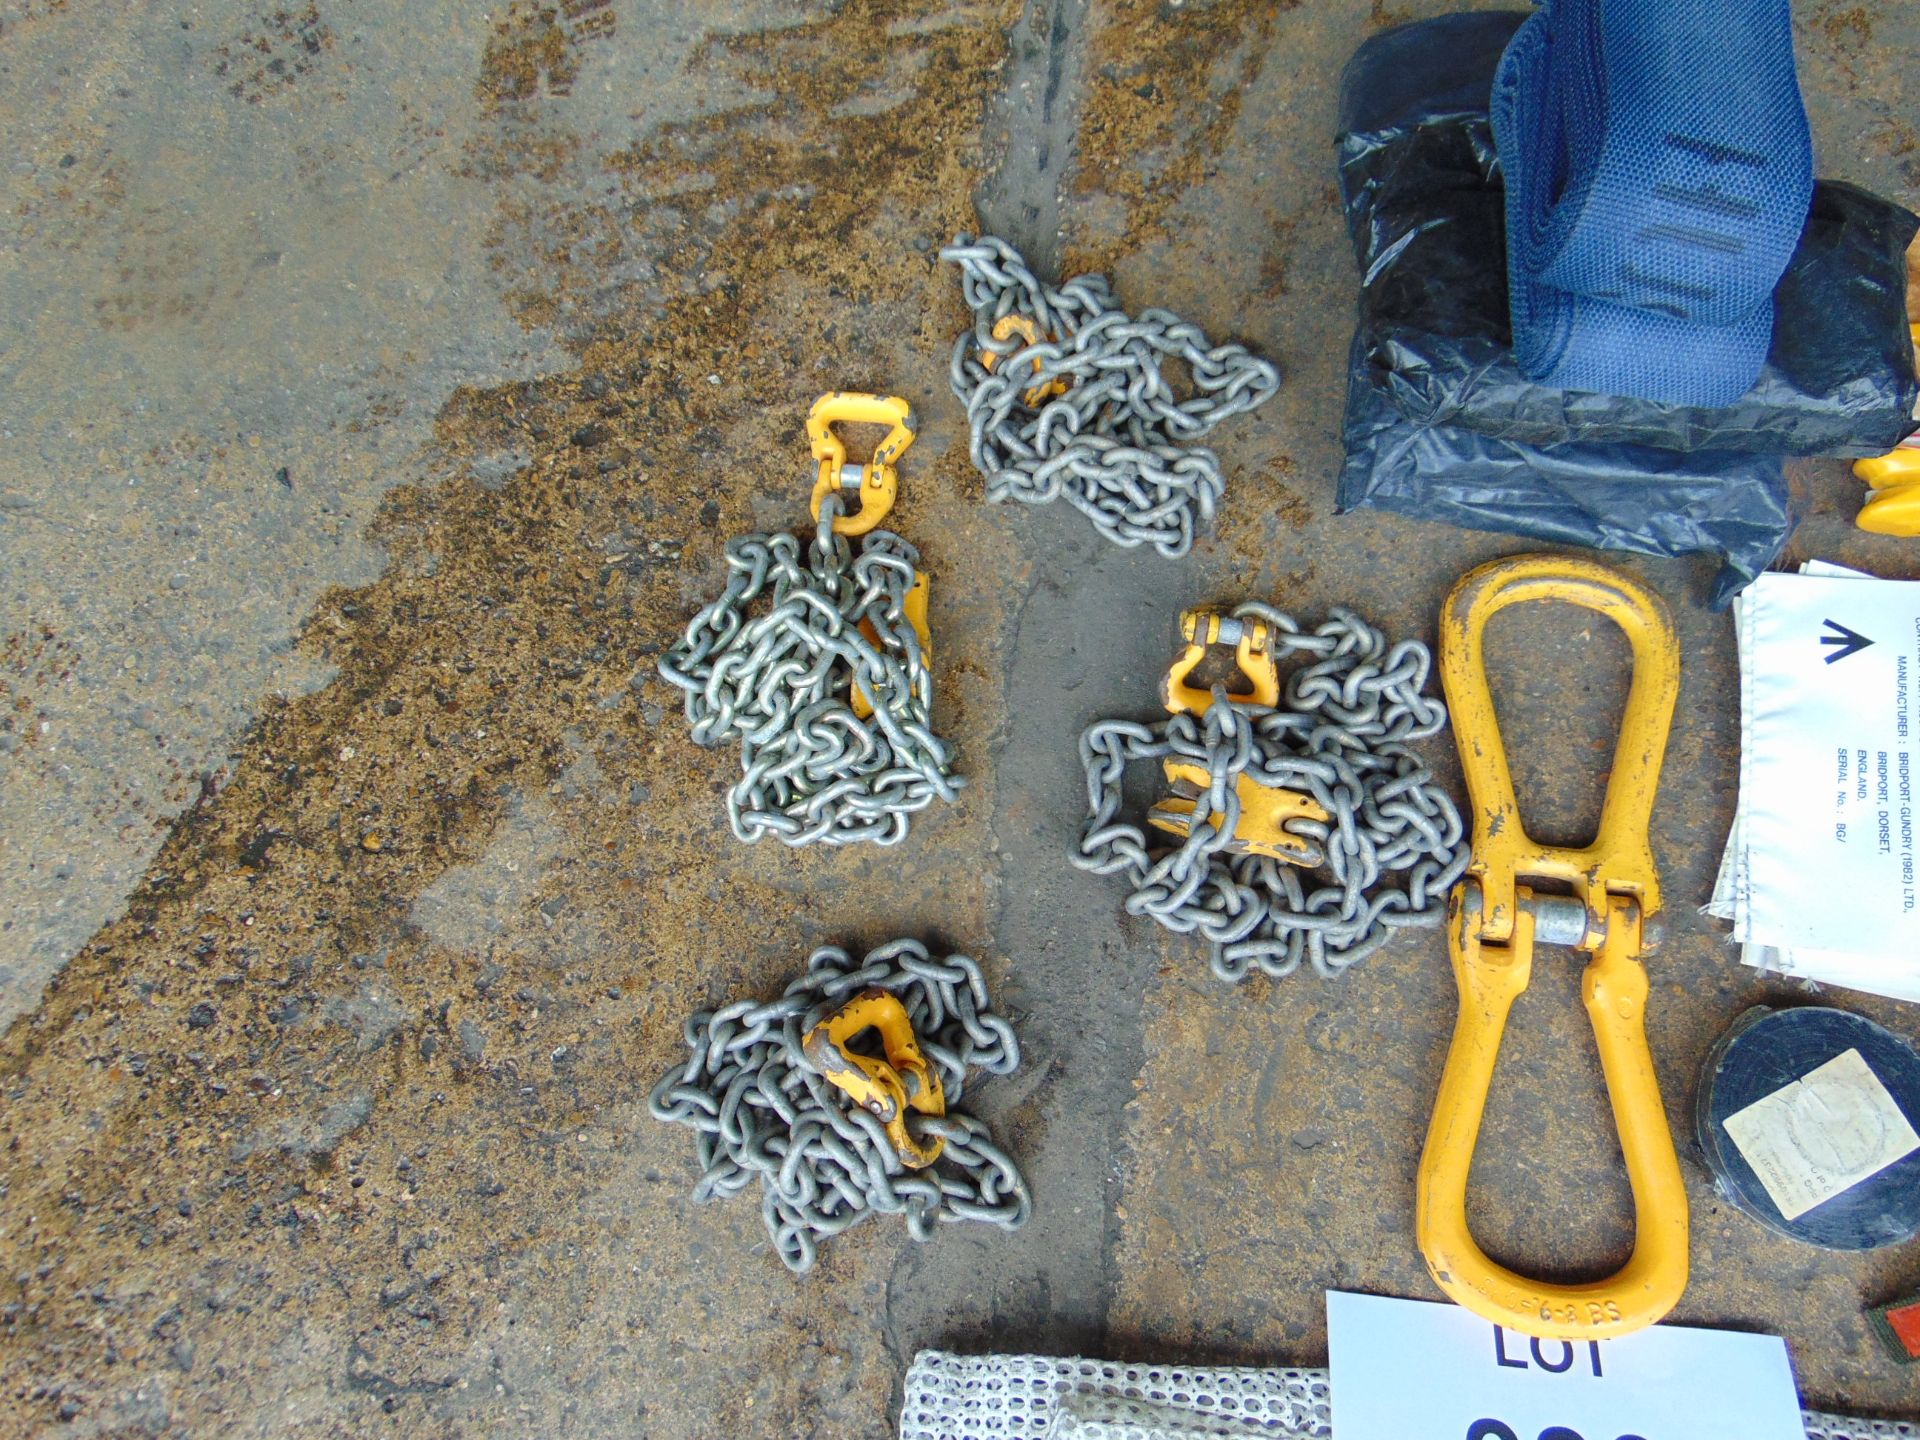 Lifting Kit c/w chains Straps etc Unissued - Image 3 of 4